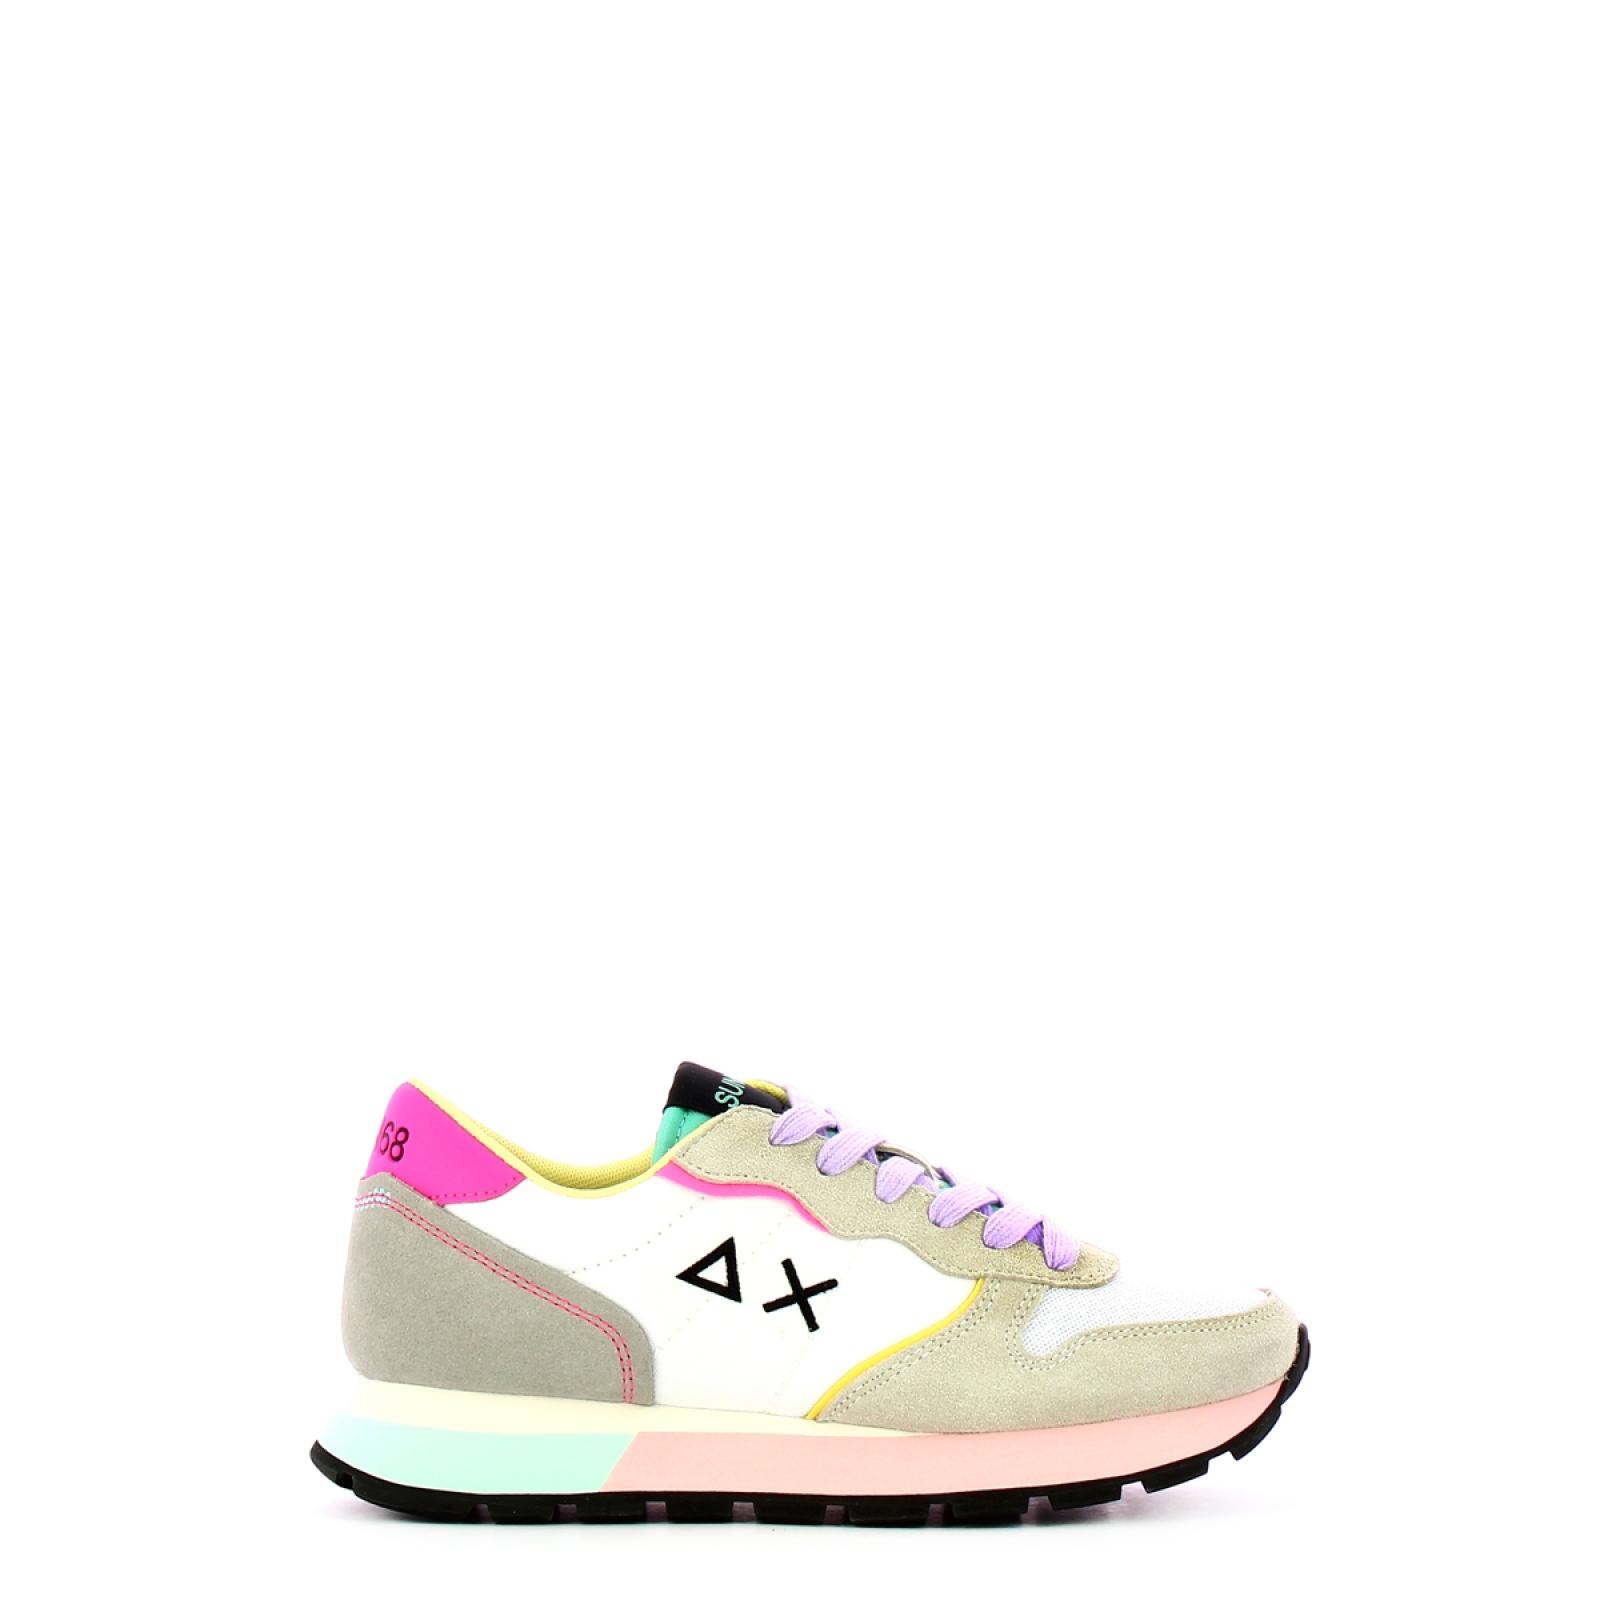 Sun68 Sneakers Ally Color Exlplosion Bianco - 1